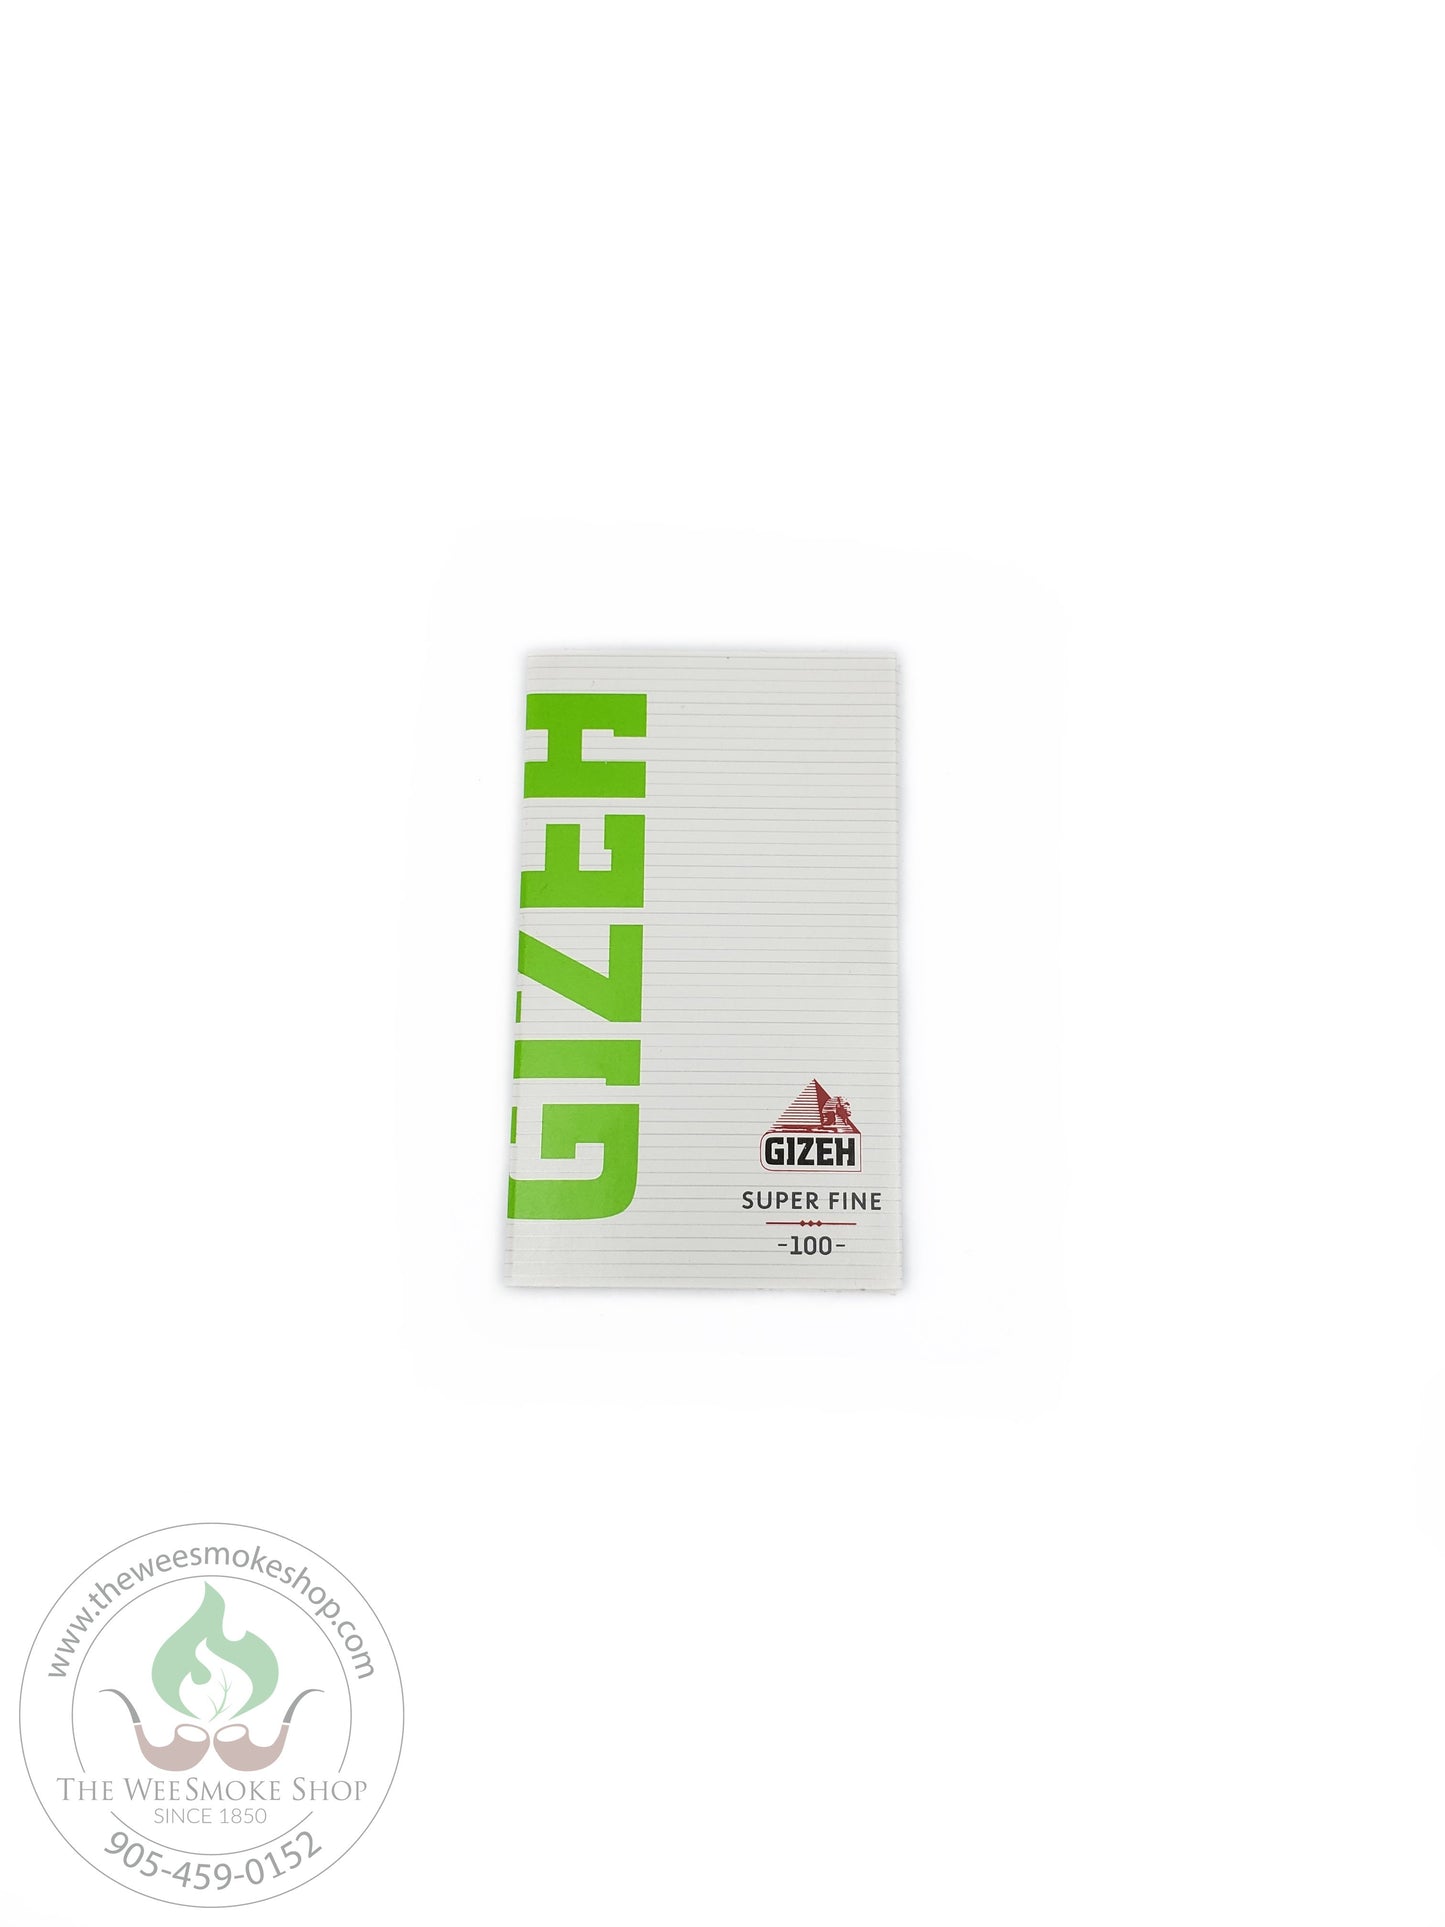 Gizeh Super Fine Green and white pack Rolling Papers.Single wide double window The Wee Smoke Shop